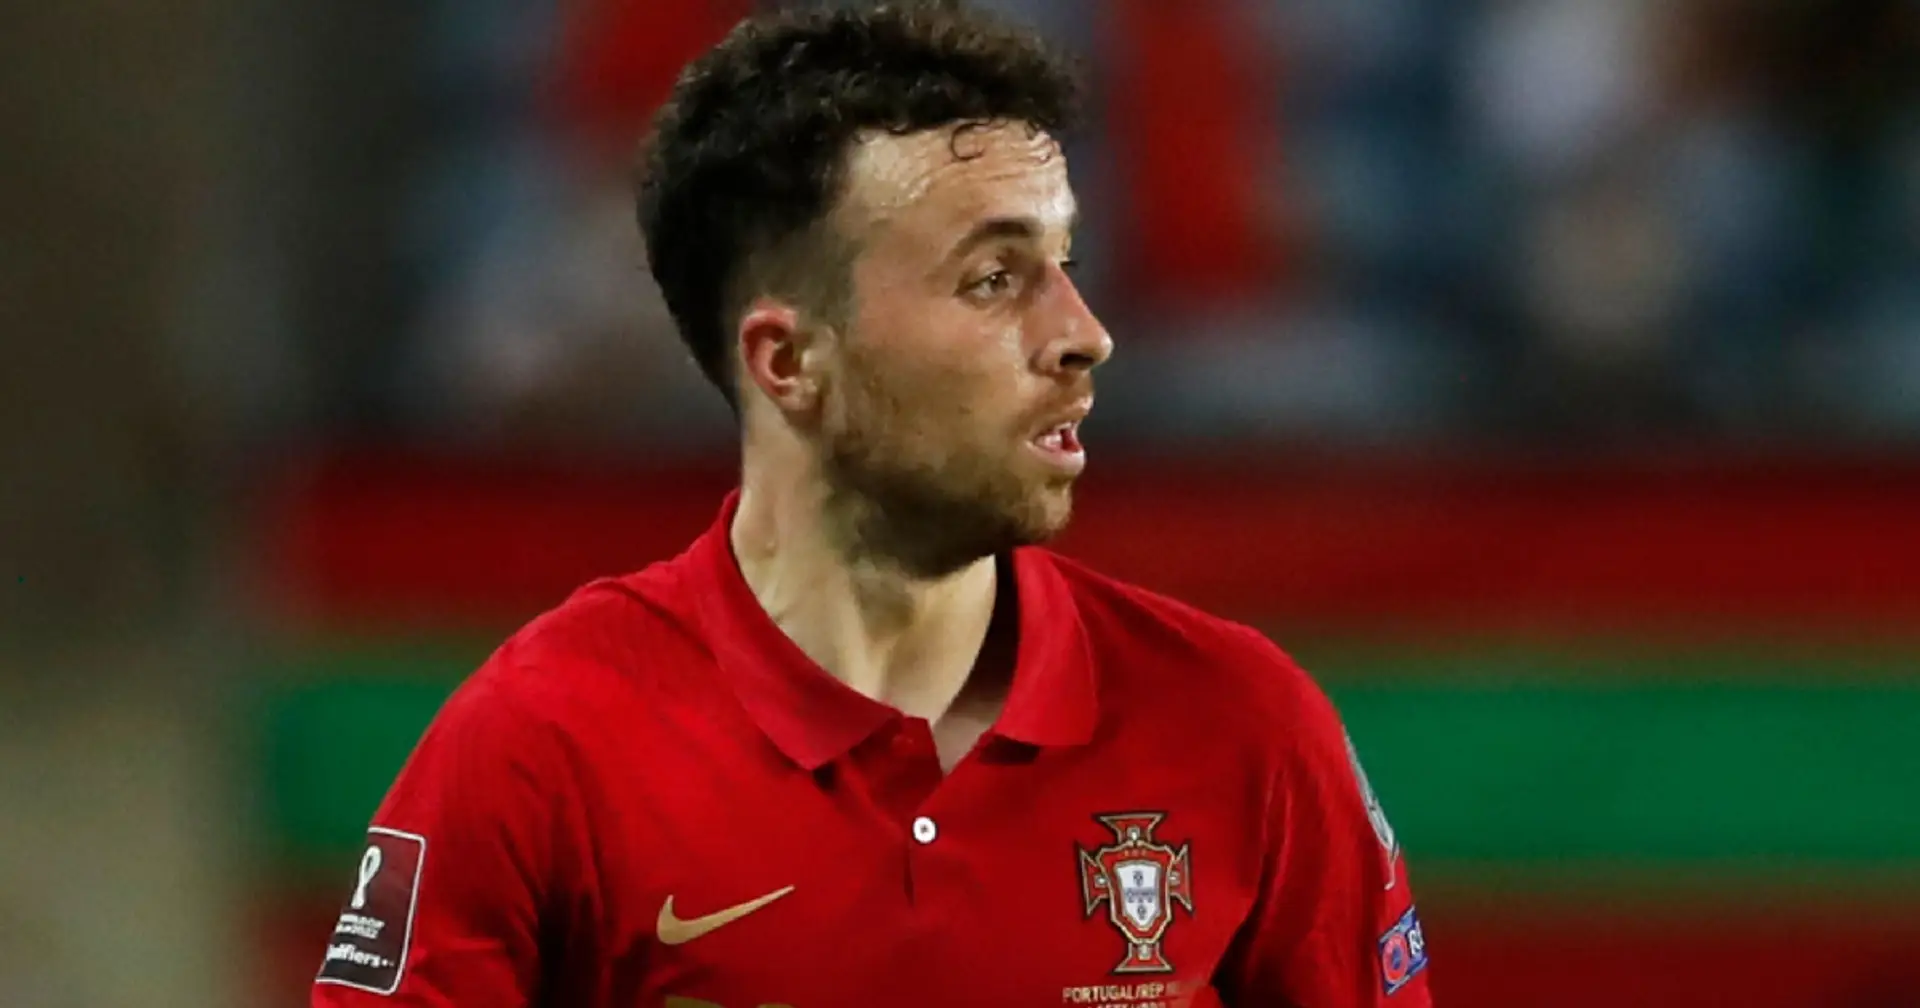 Diogo Jota returns to Liverpool after injury: The Athletic